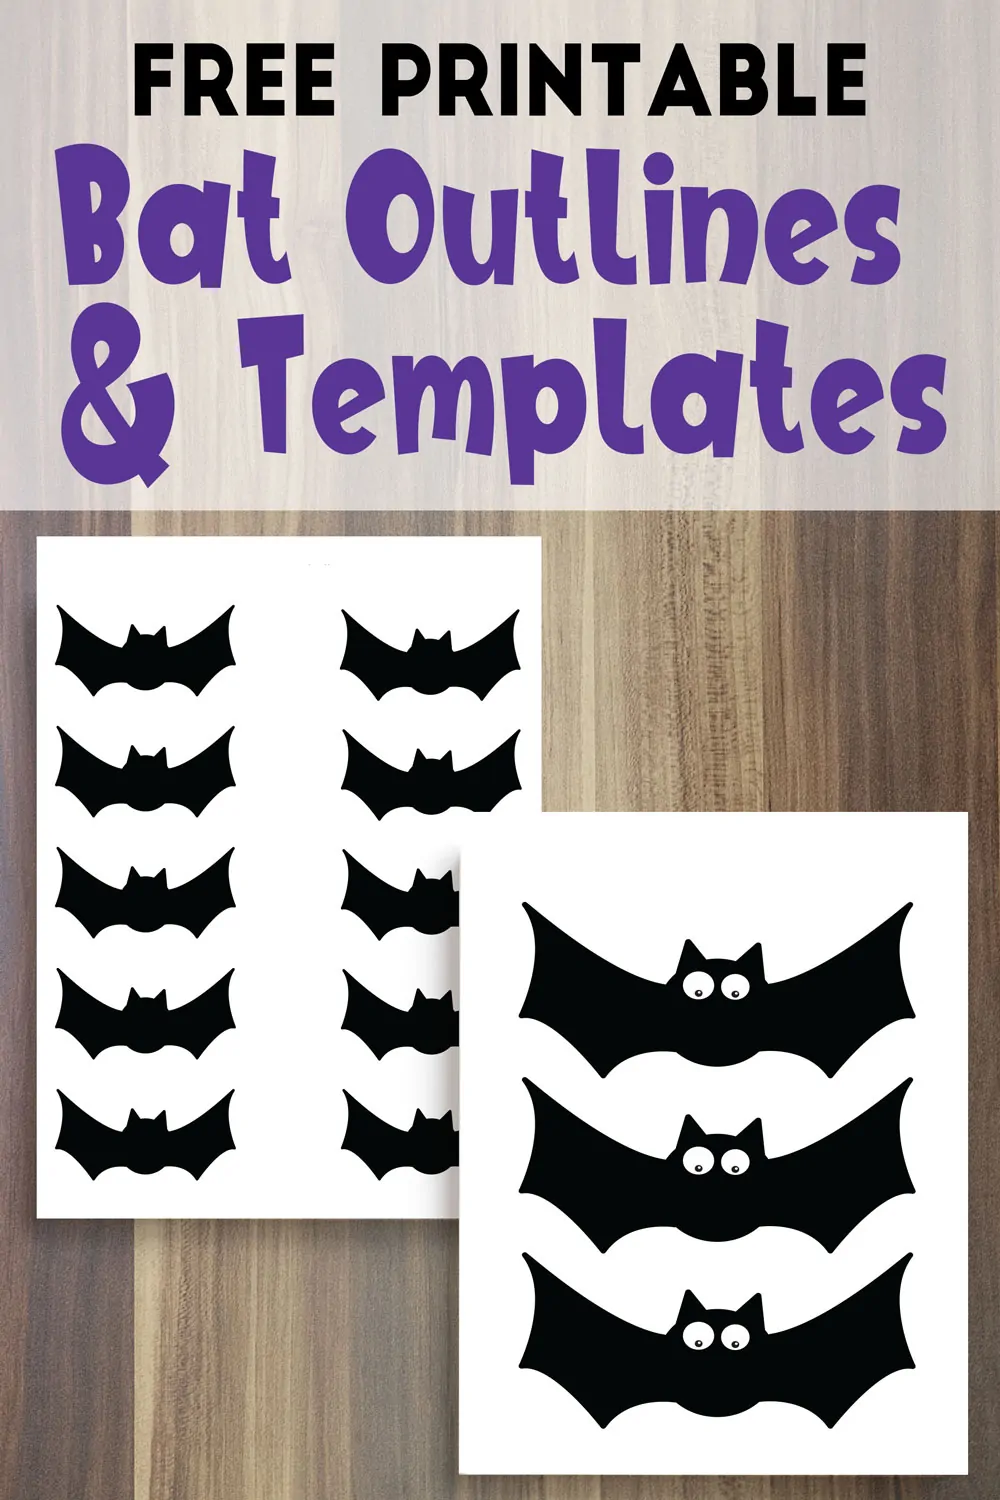 free-printable-bat-outlines-and-templates